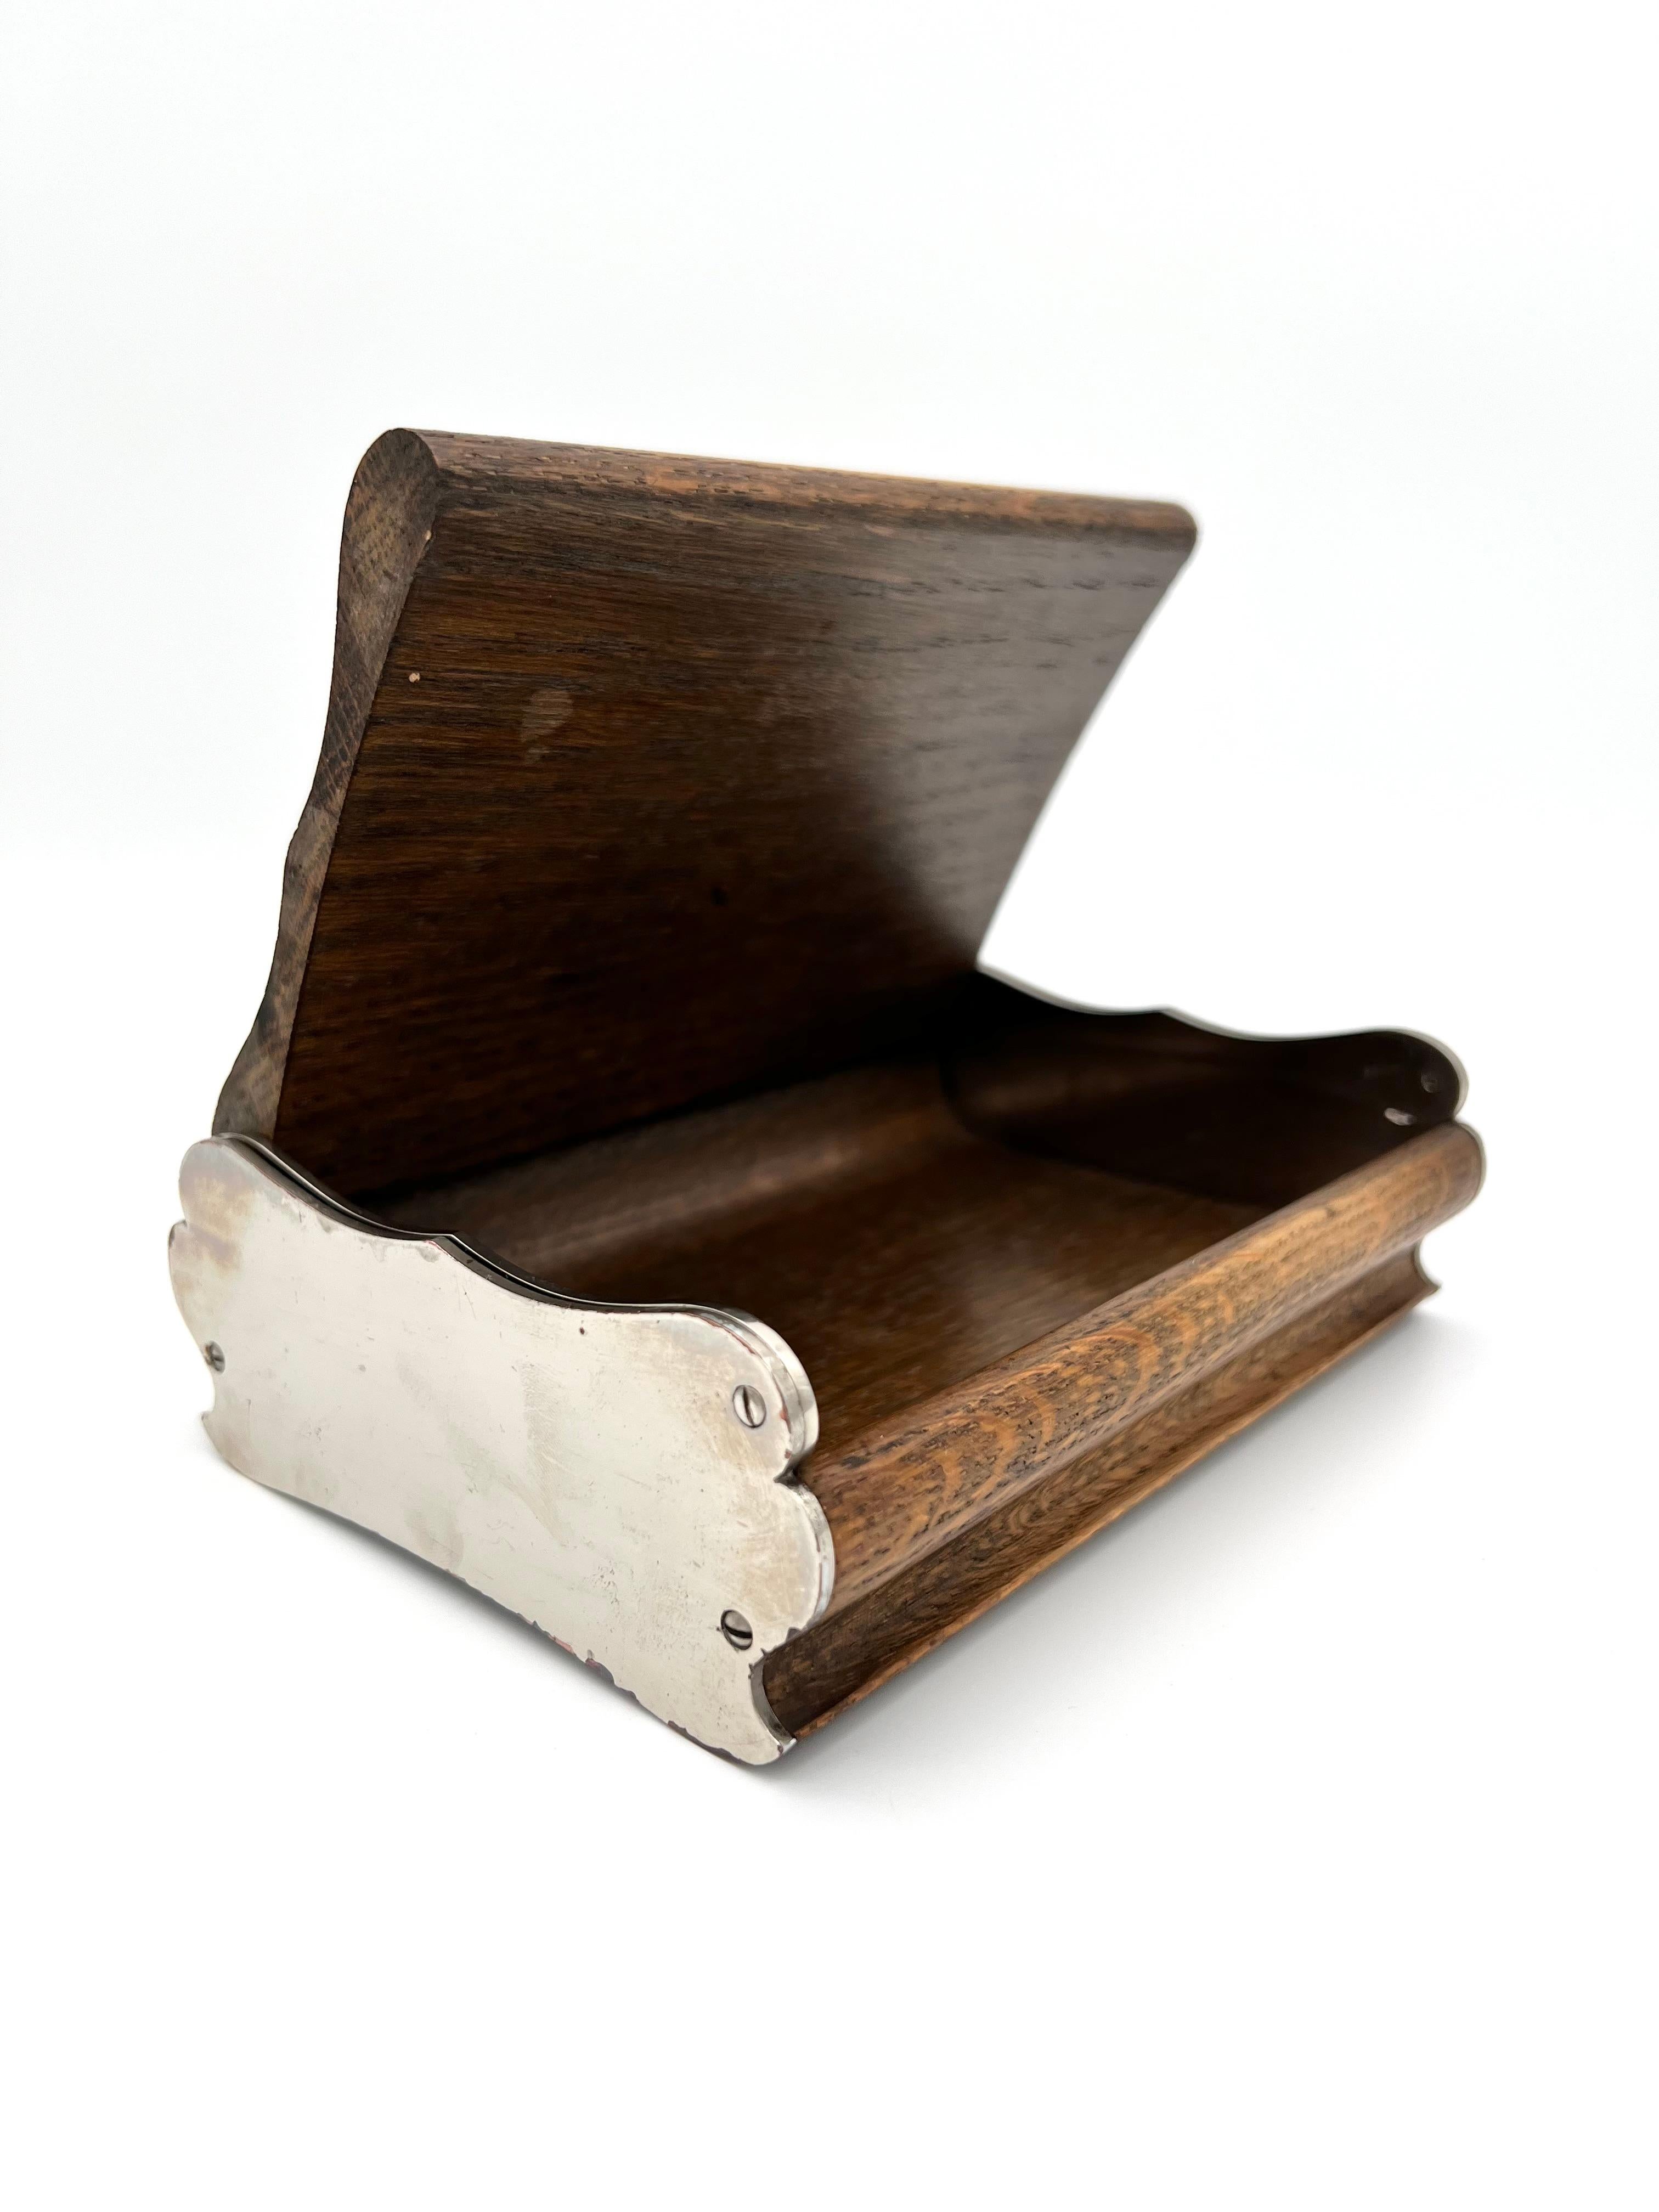 Auböck Cigarette Box, Ash Wood and Nickel Plated Brass, 1930s For Sale 4